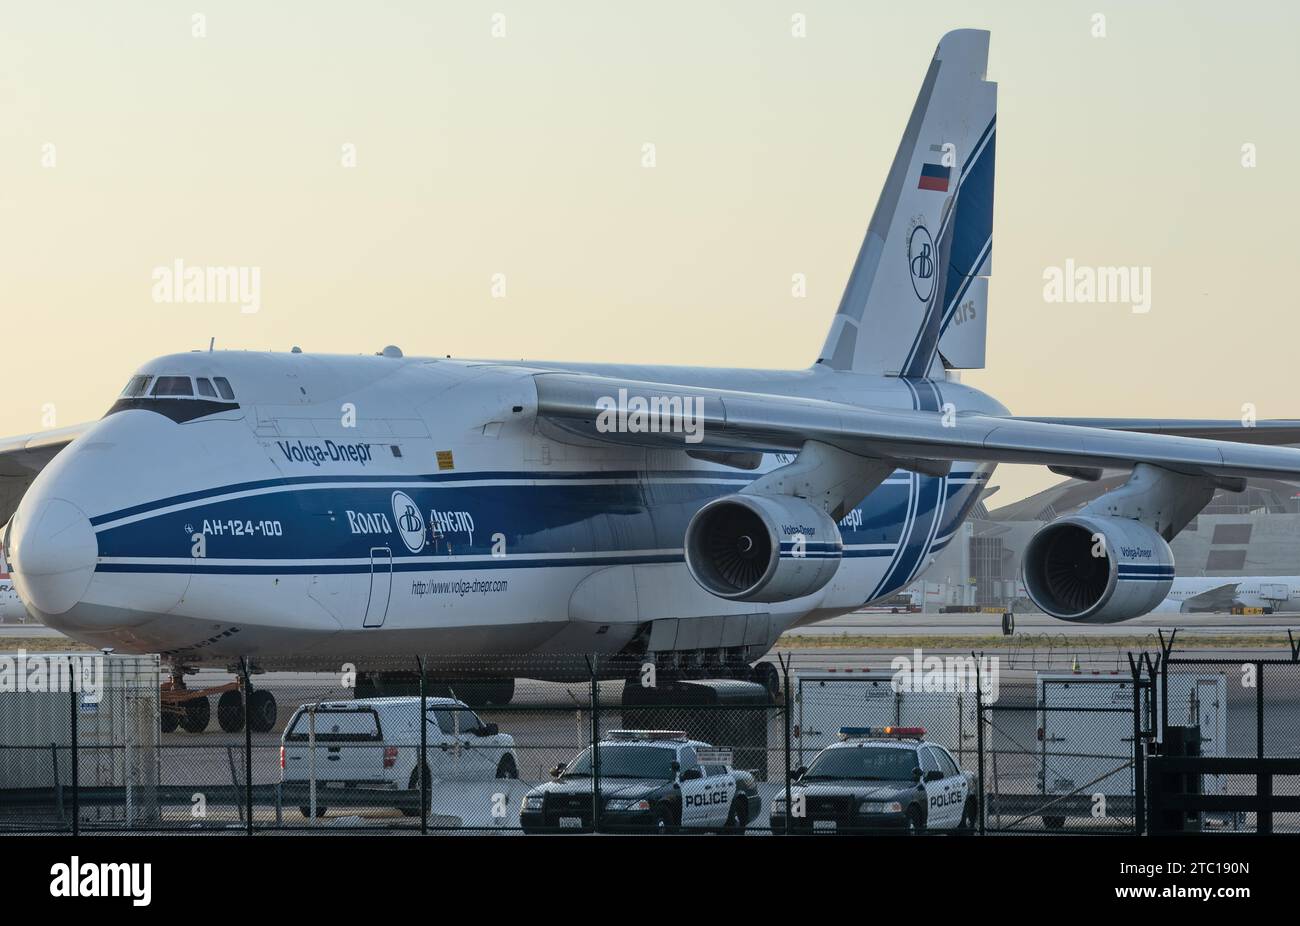 Antonov with registration AH-124-100 shown parked at LAX, Los Angeles International Airport. Stock Photo